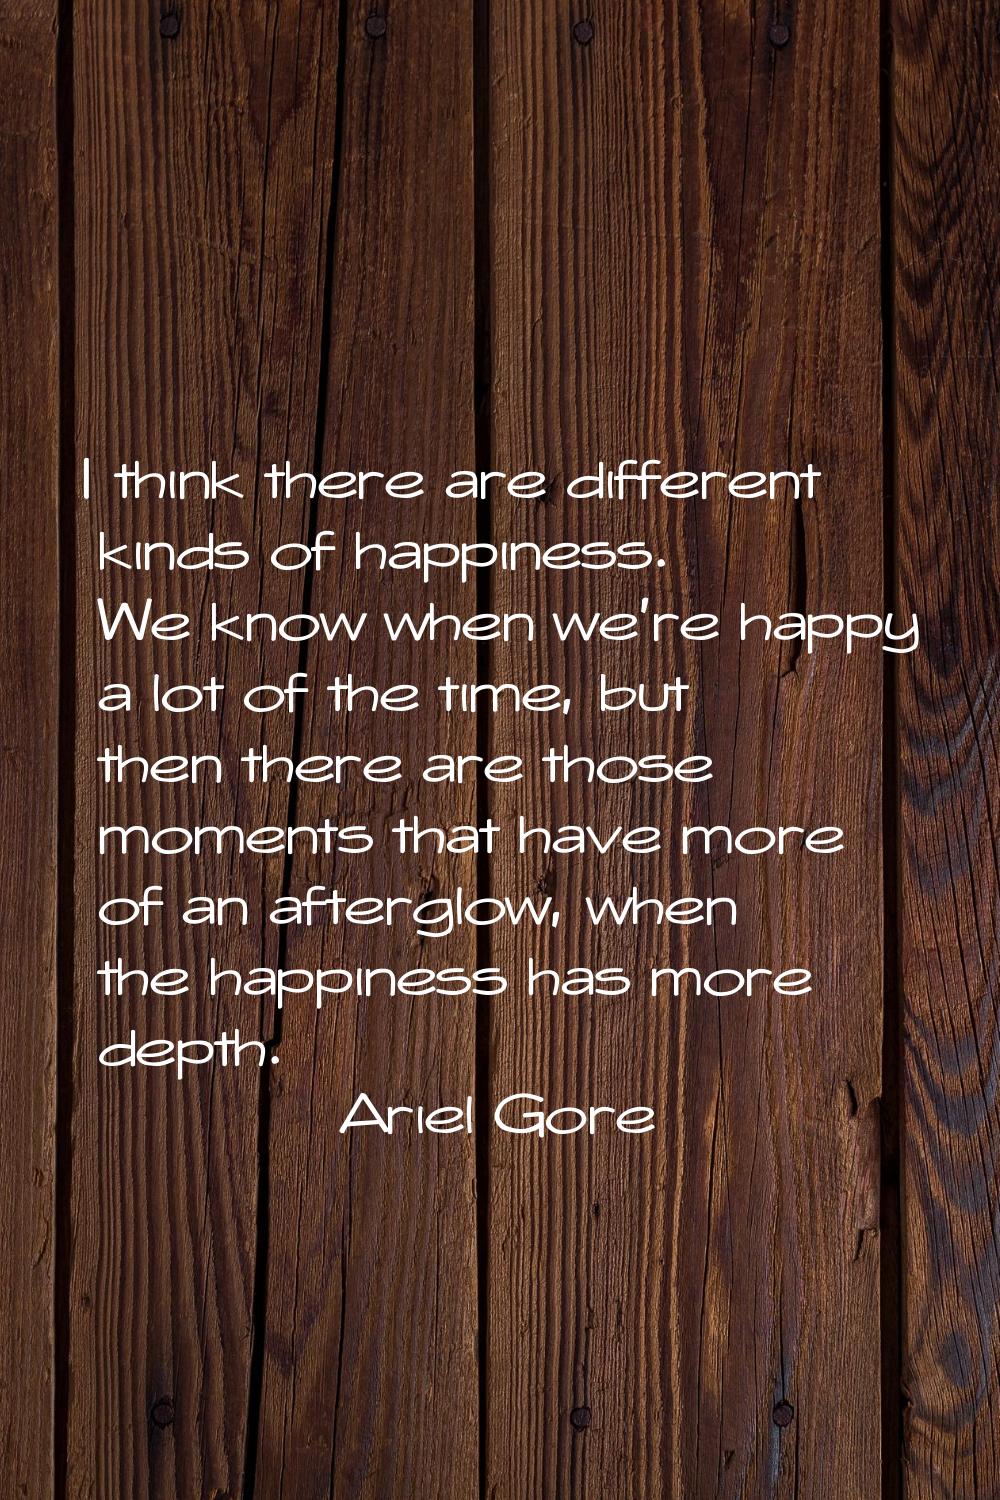 I think there are different kinds of happiness. We know when we're happy a lot of the time, but the